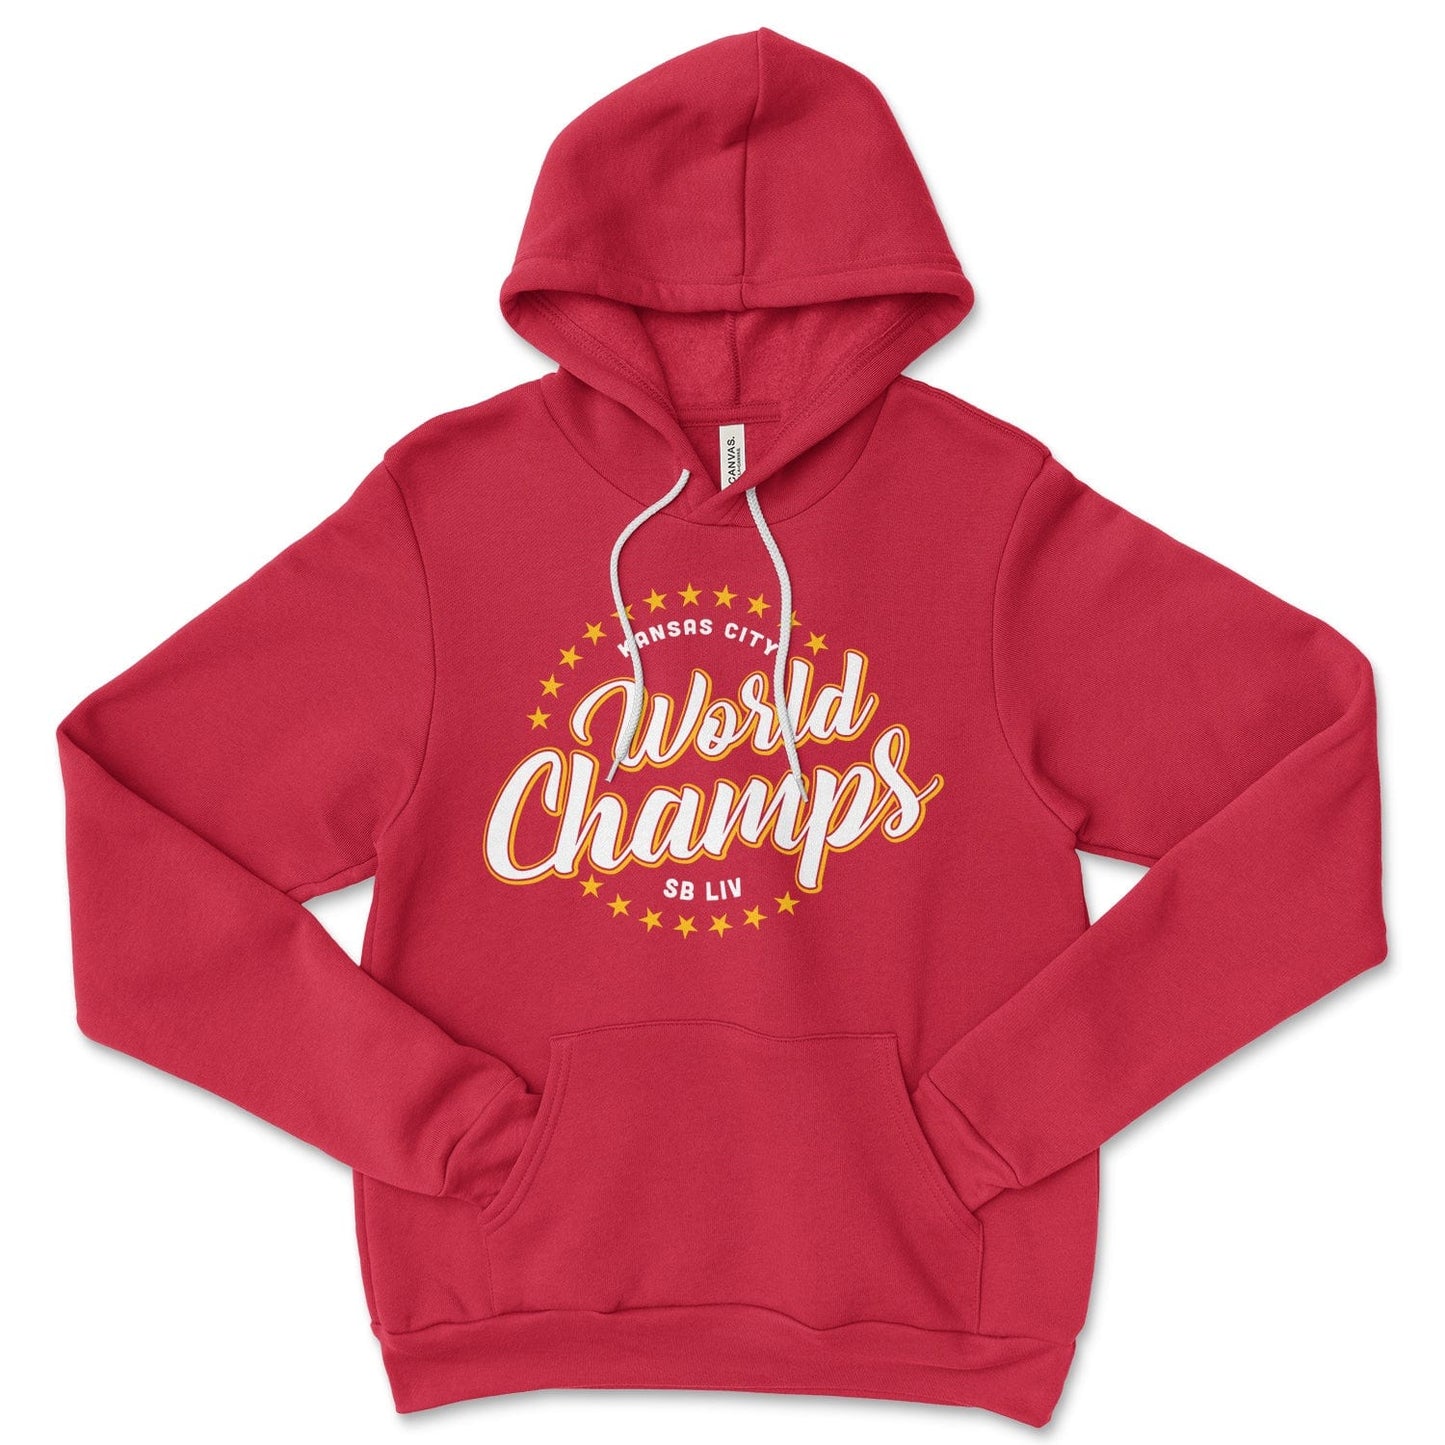 KC Swag Kansas City WORLD CHAMPS SBLIV on red fleece pullover hoodie